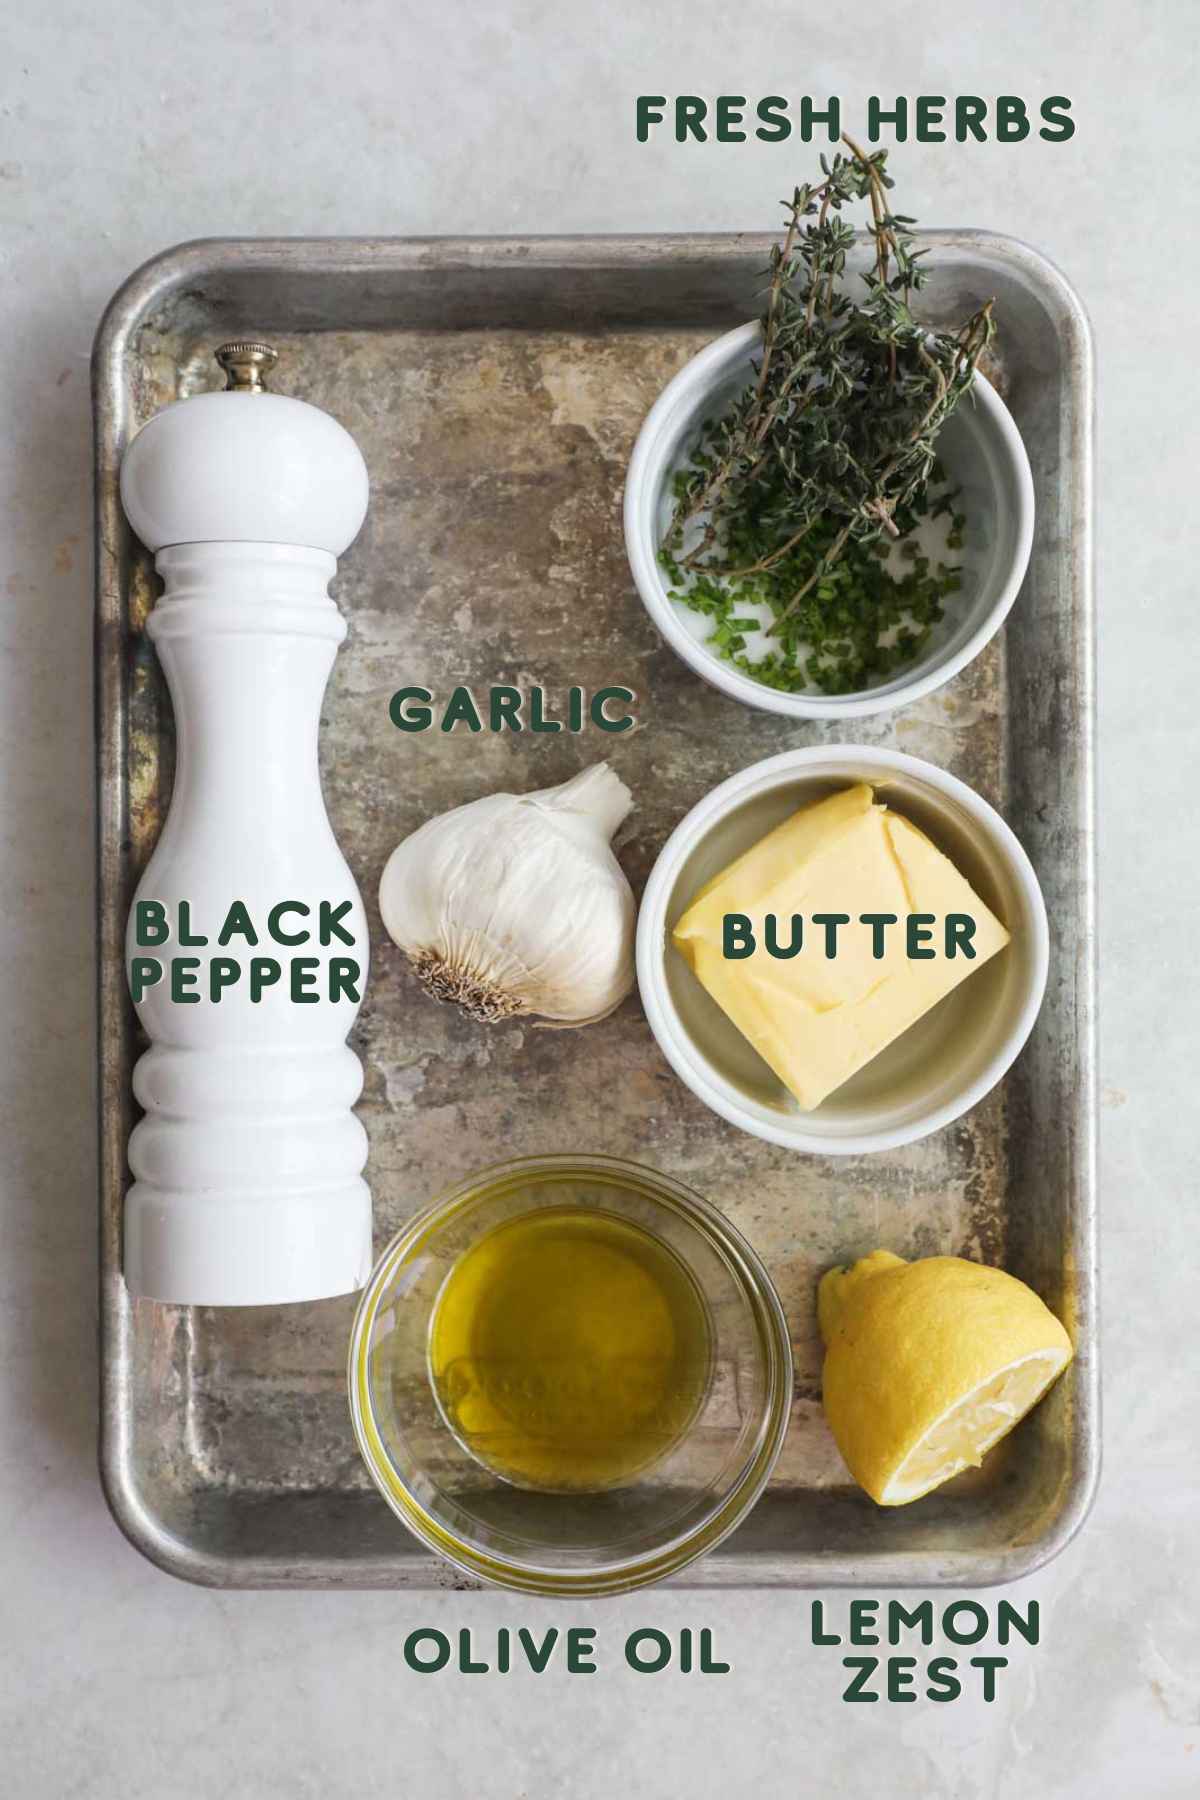 Ingredients to make roasted herb garlic butter, like high-quality butter, fresh herbs, garlic, olive oil, lemon zest, and black pepper.